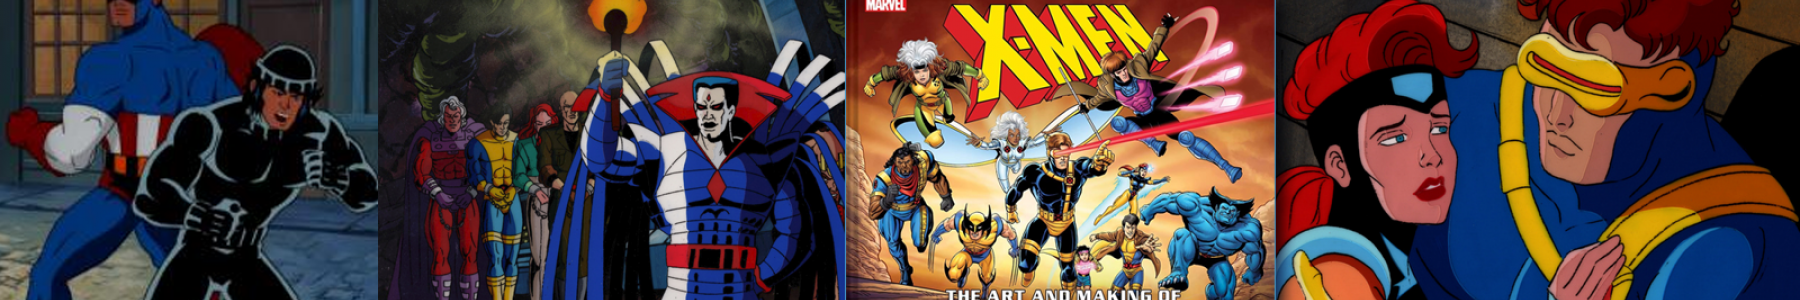 The Art and Making of X-Men: The Animated Series